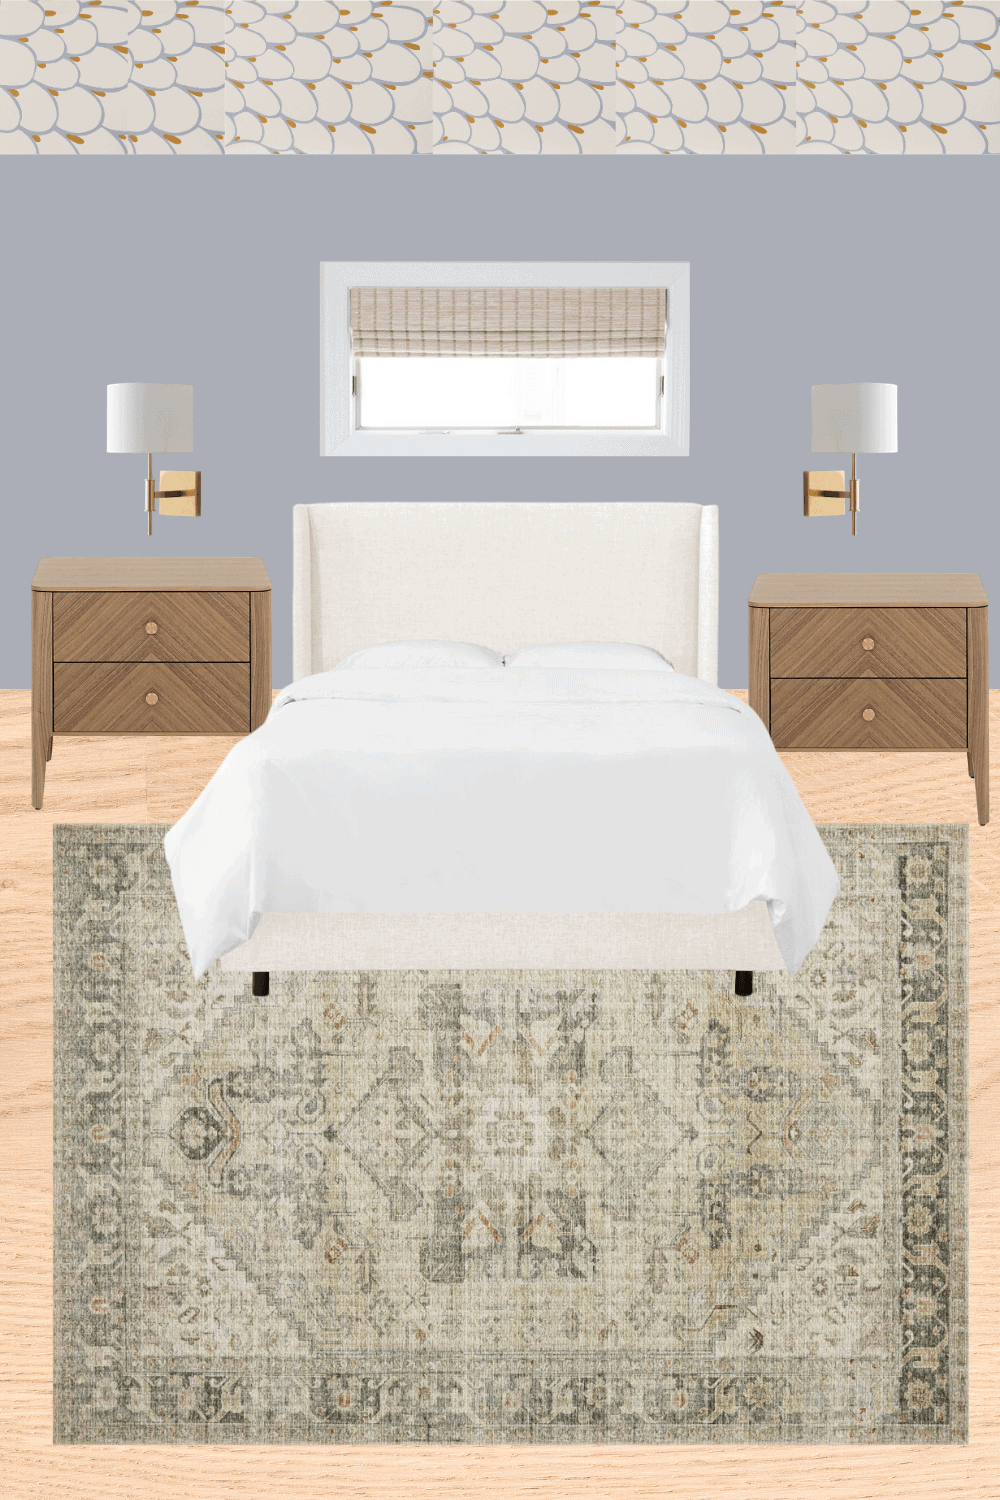 our main bedroom design plan